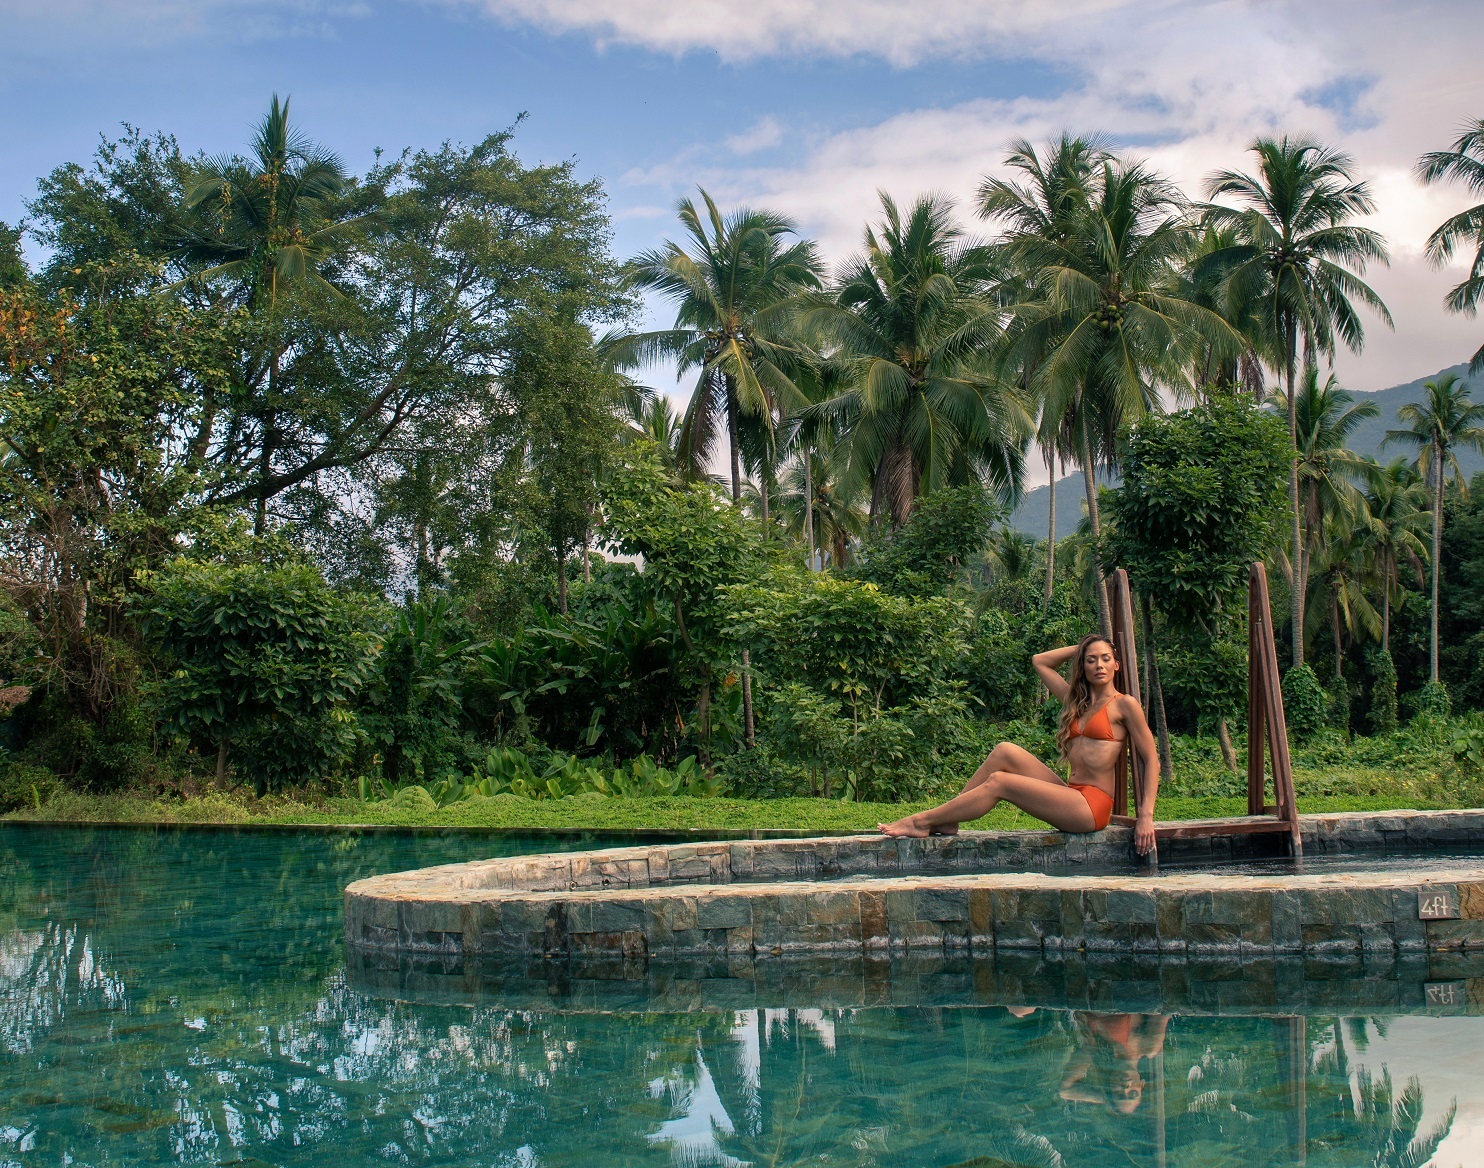 Get away from the stress of everyday life by considering a wellness holiday as your next escape